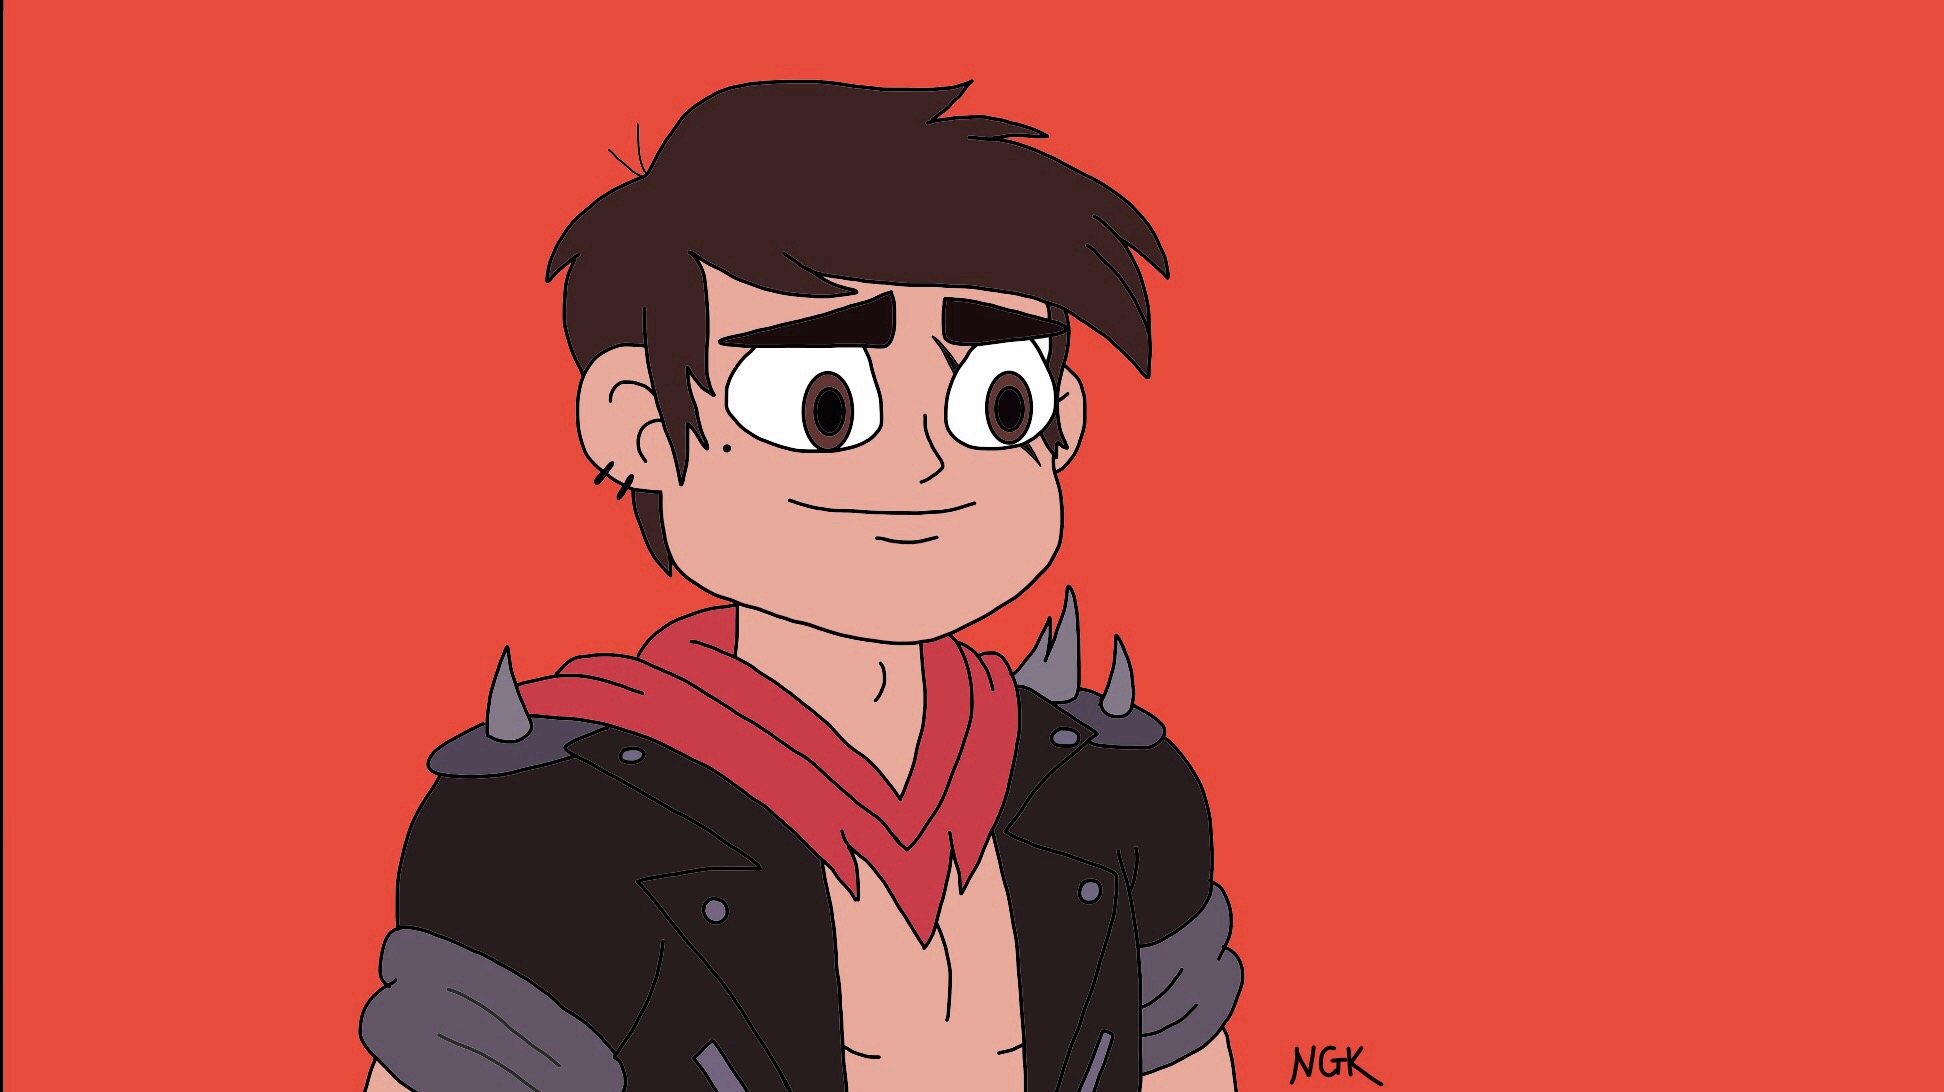 Marco Diaz By Heathersuoh On Deviantart.